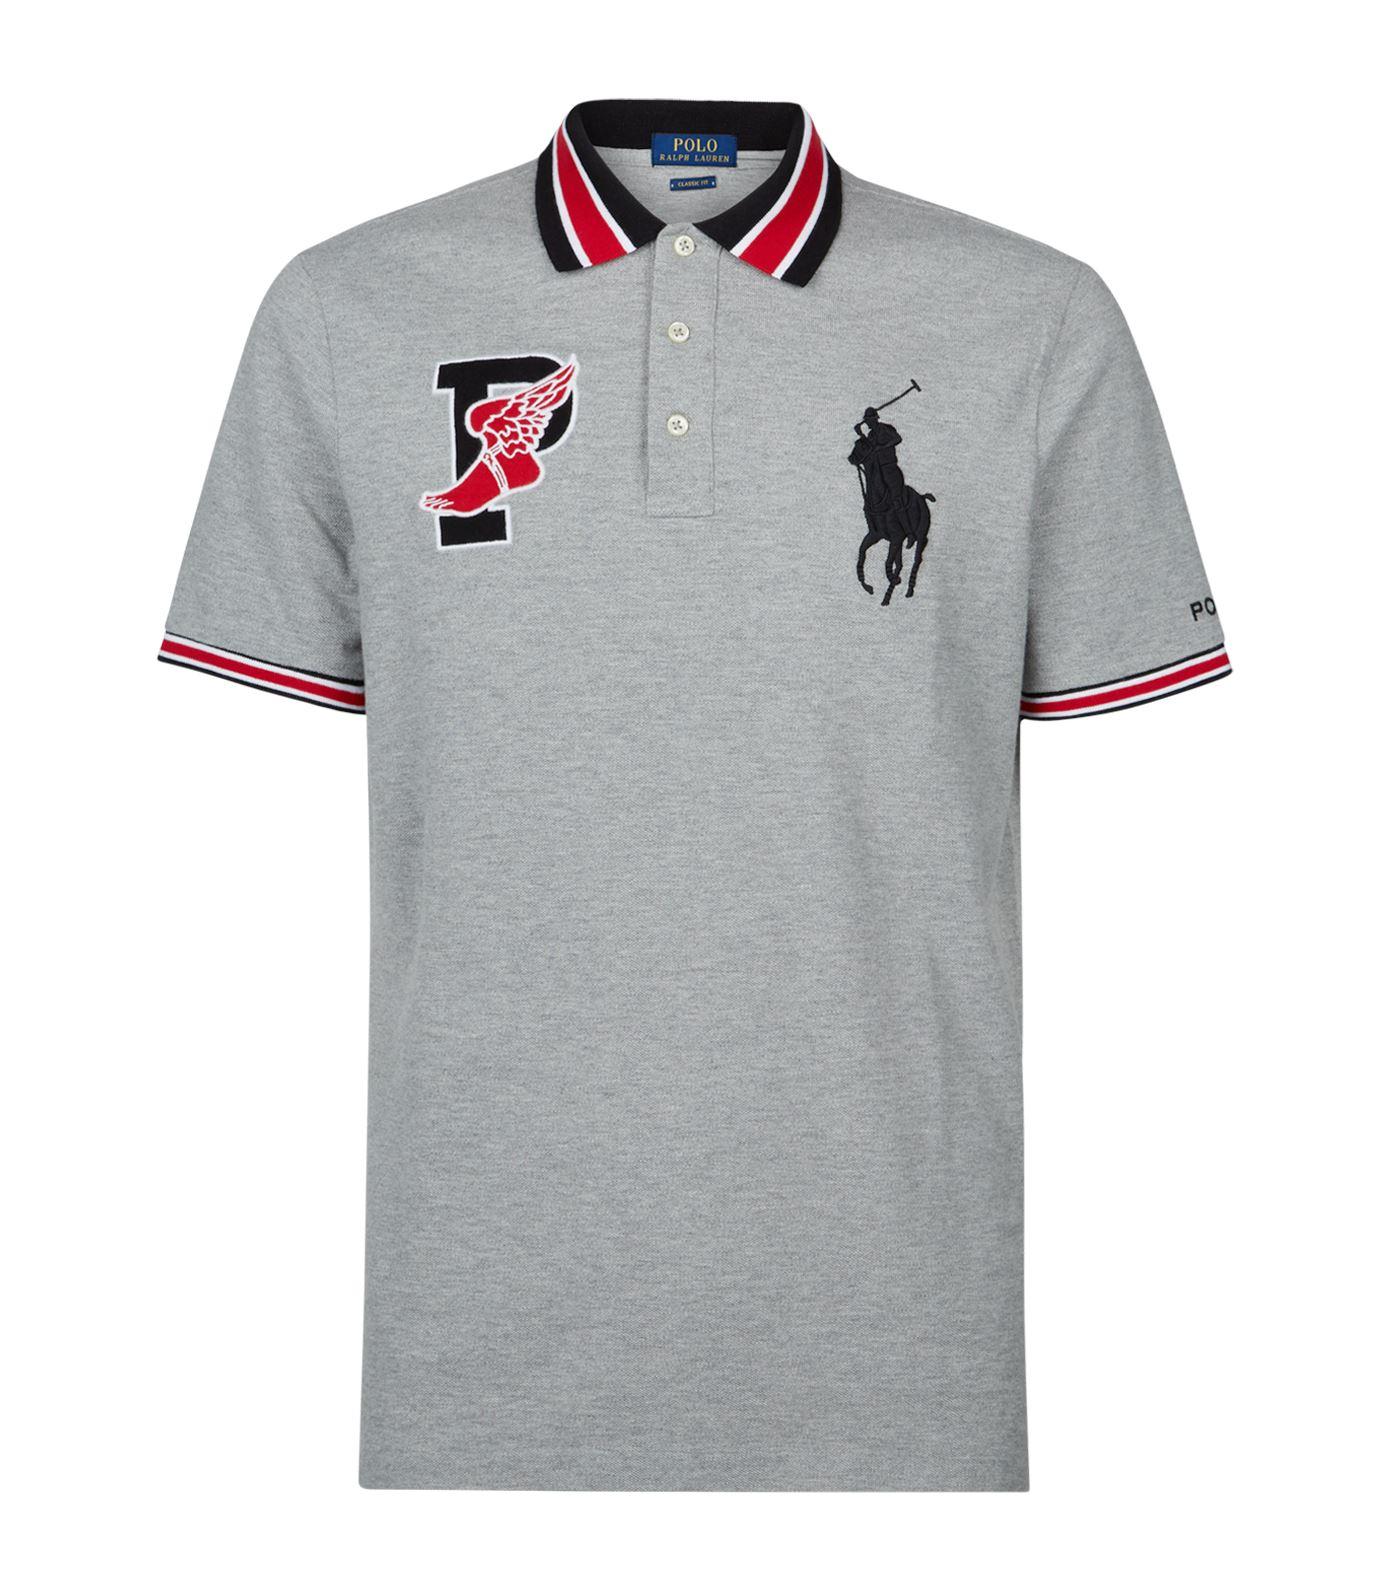 Polo Ralph Lauren Winged Foot Polo Shirt in Grey (Gray) for Men - Lyst